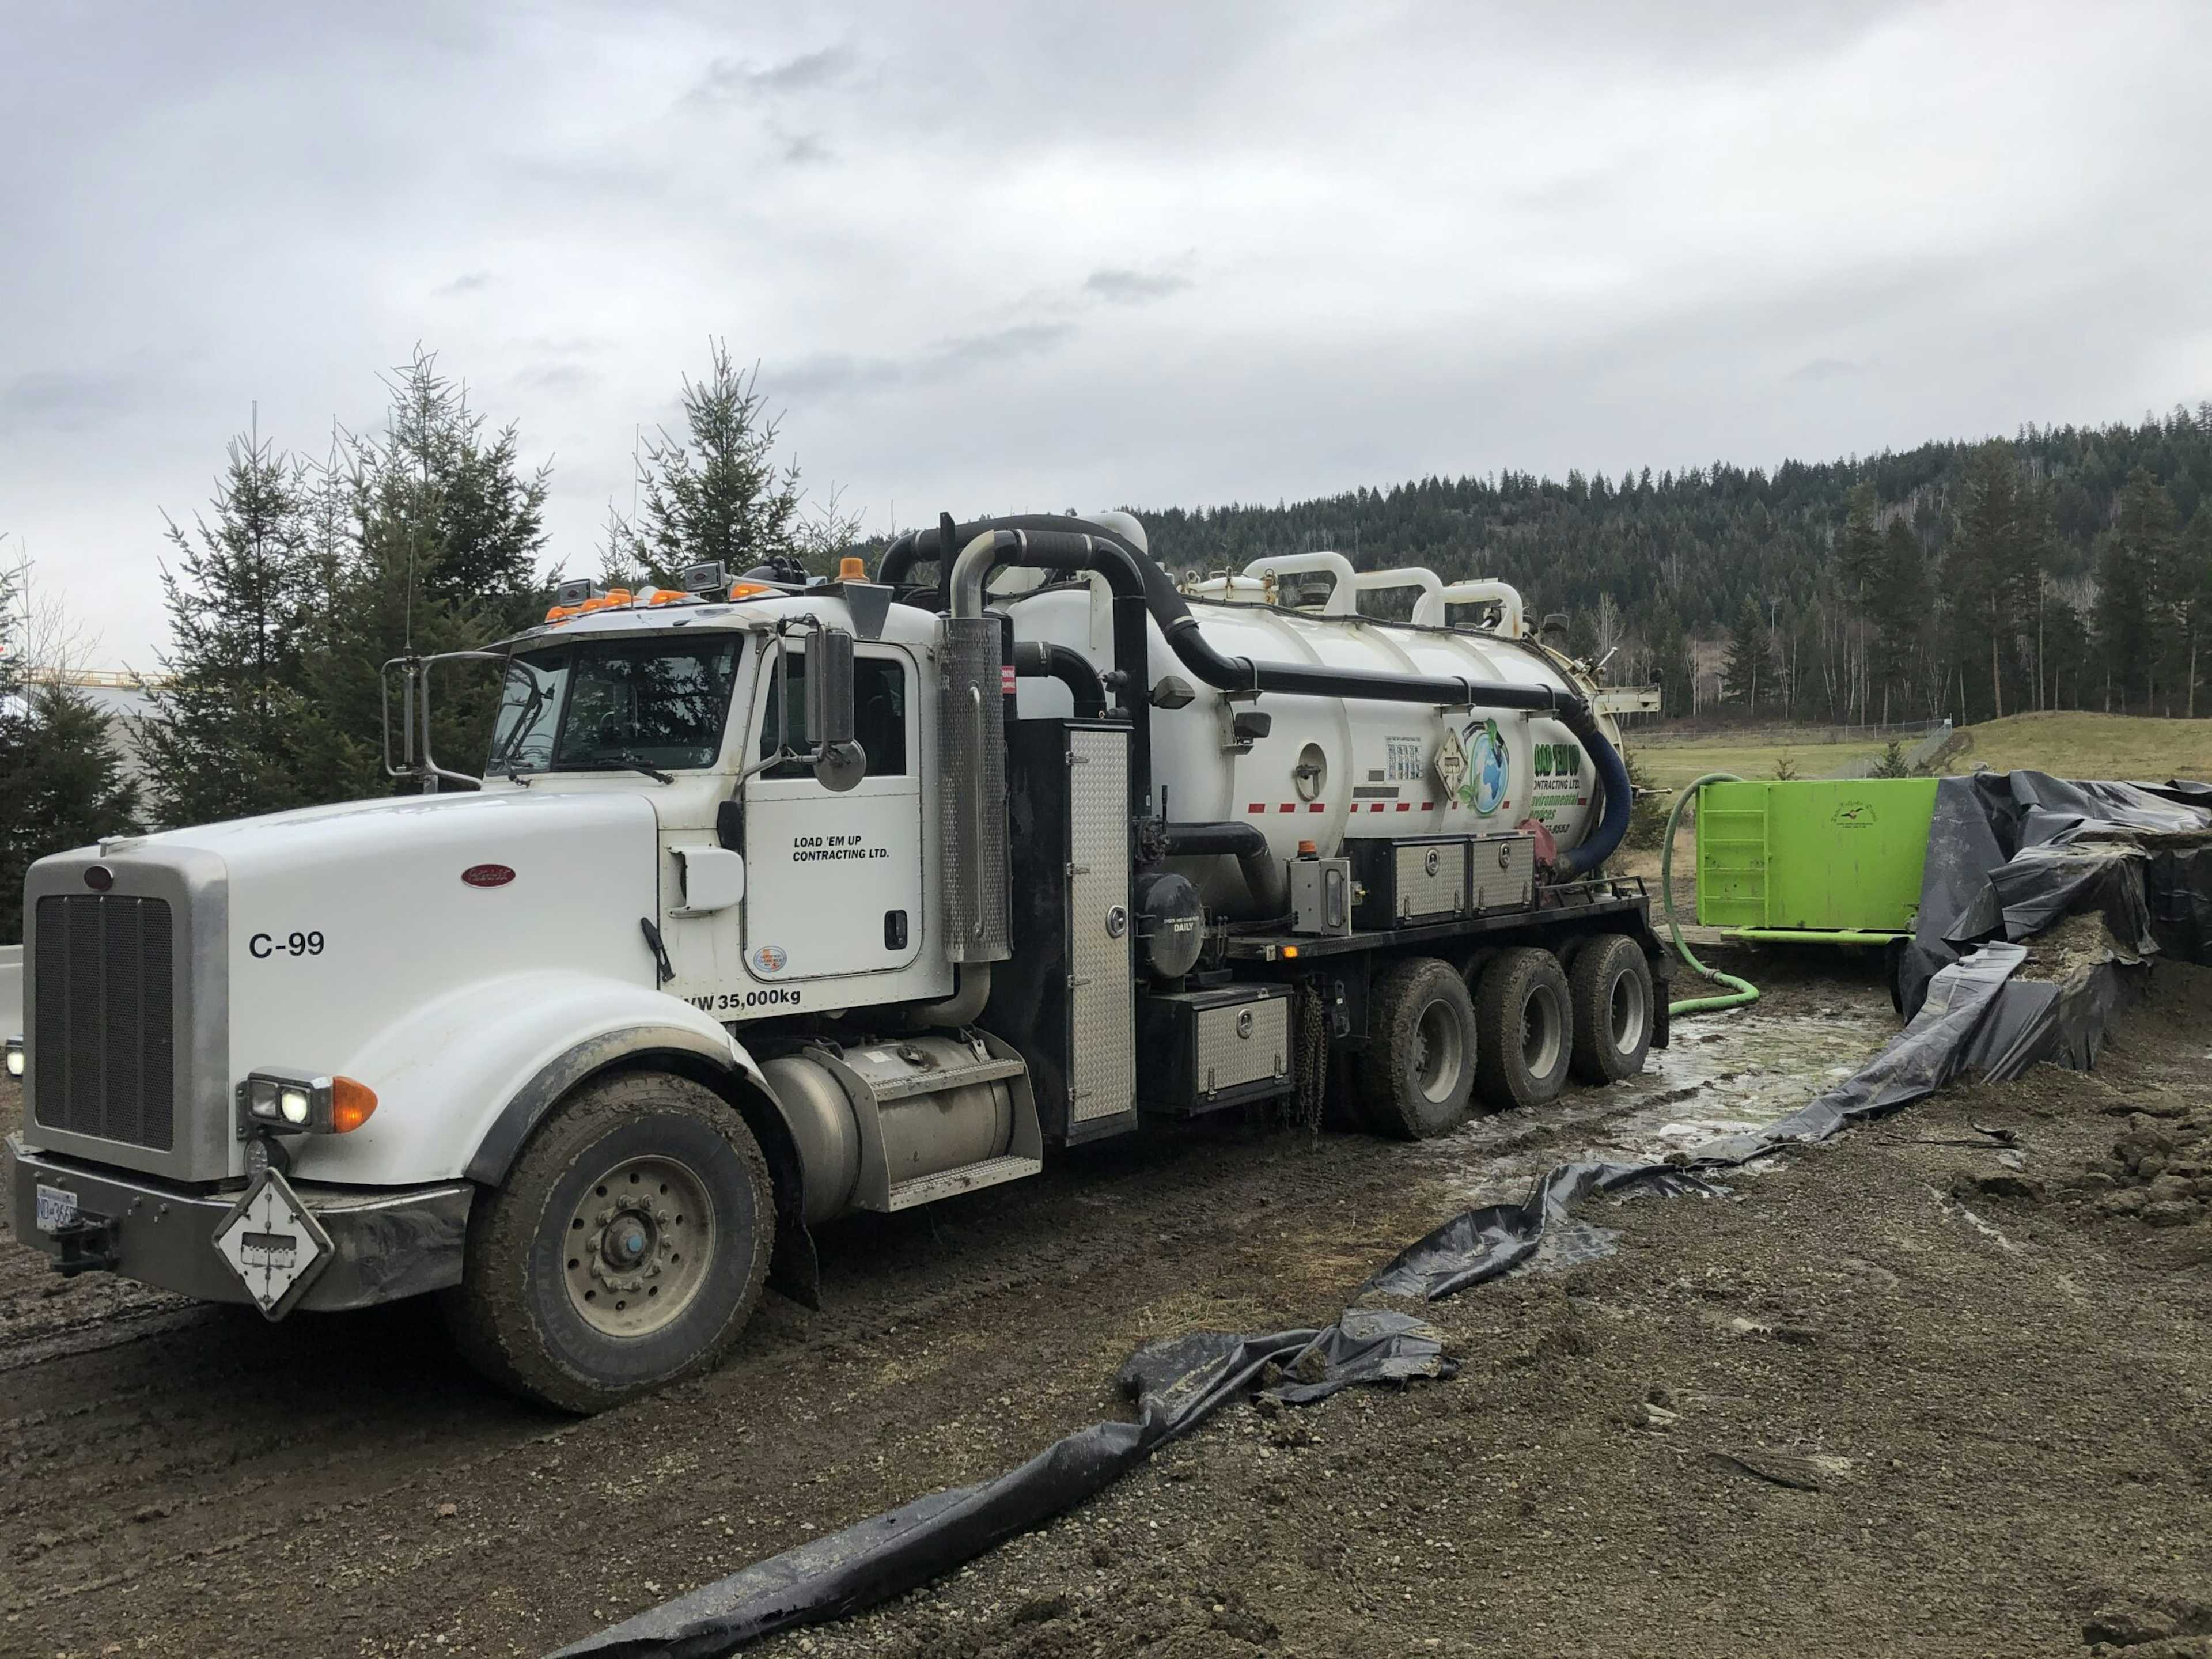 Wastewater Hauling for a Energy Services Provider